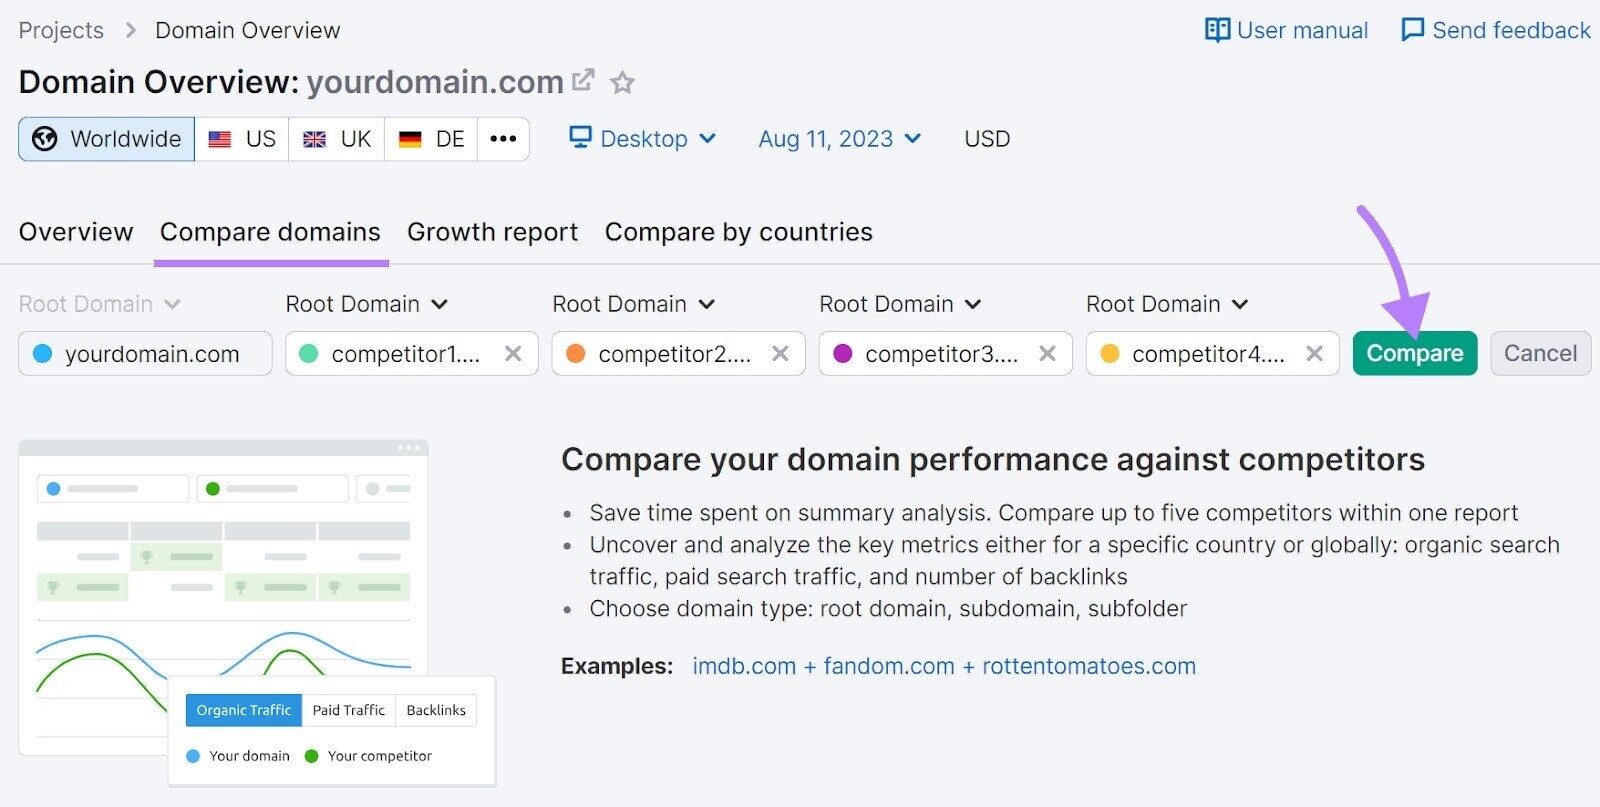 compare your Authority Score to your competitors in “Compare domains” tab